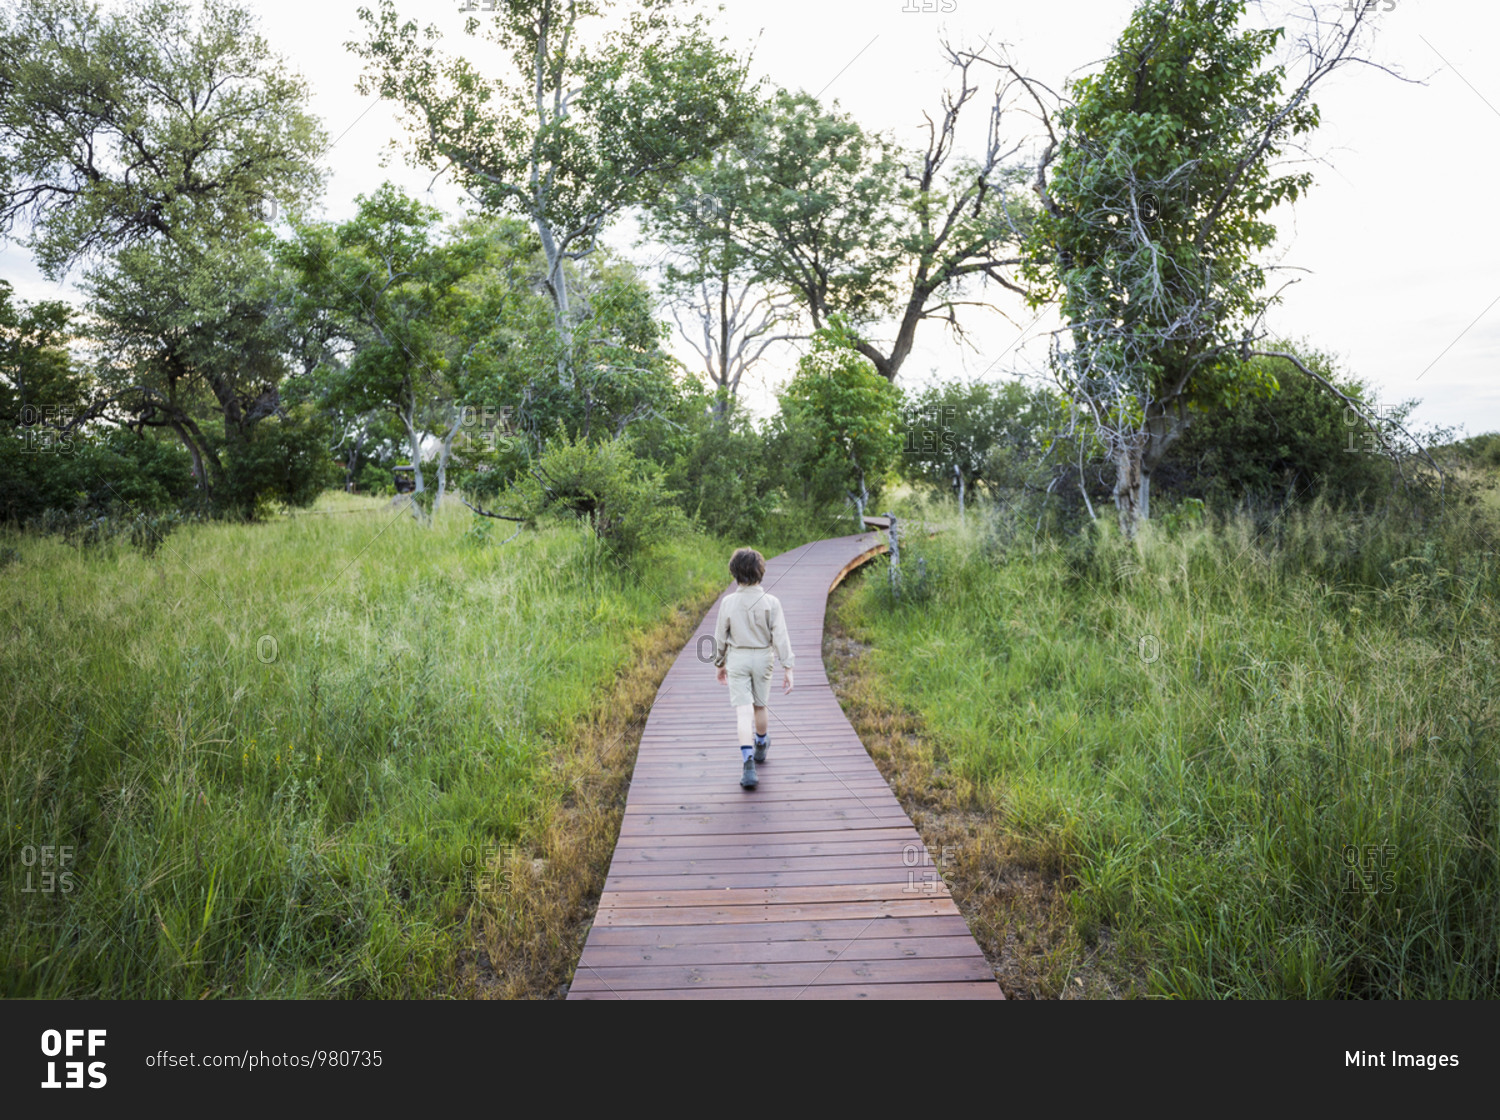 A six year old boy walking on wooden path at a tented safari camp